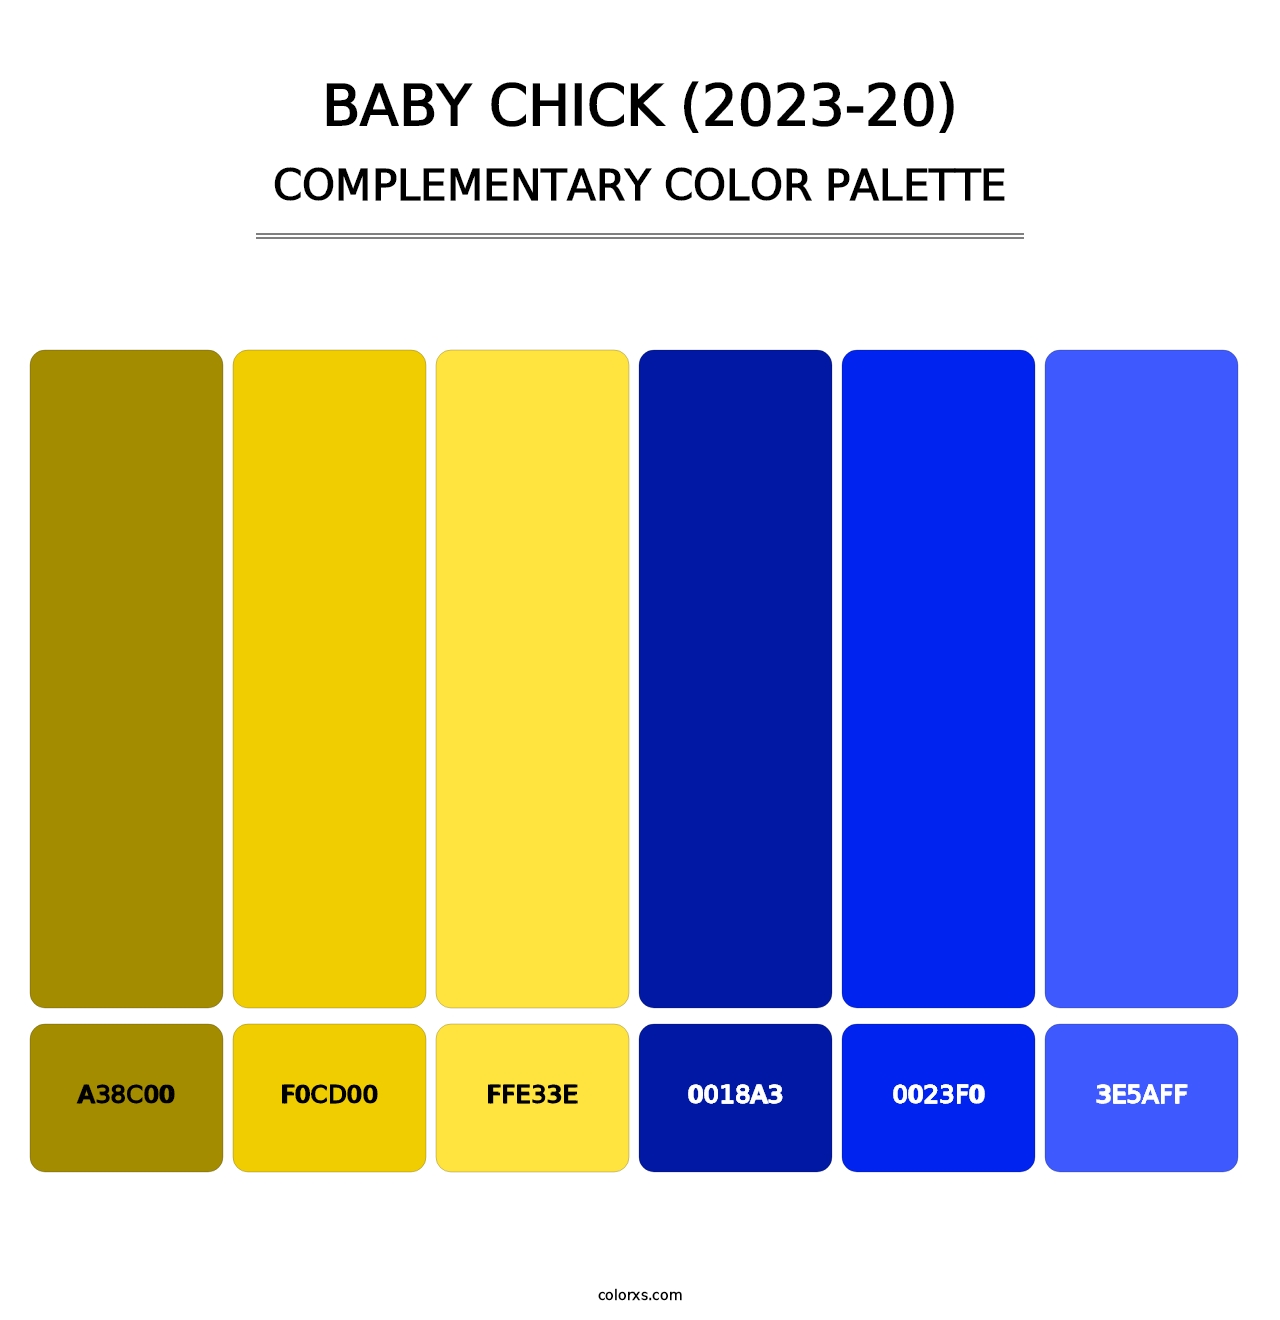 Baby Chick (2023-20) - Complementary Color Palette